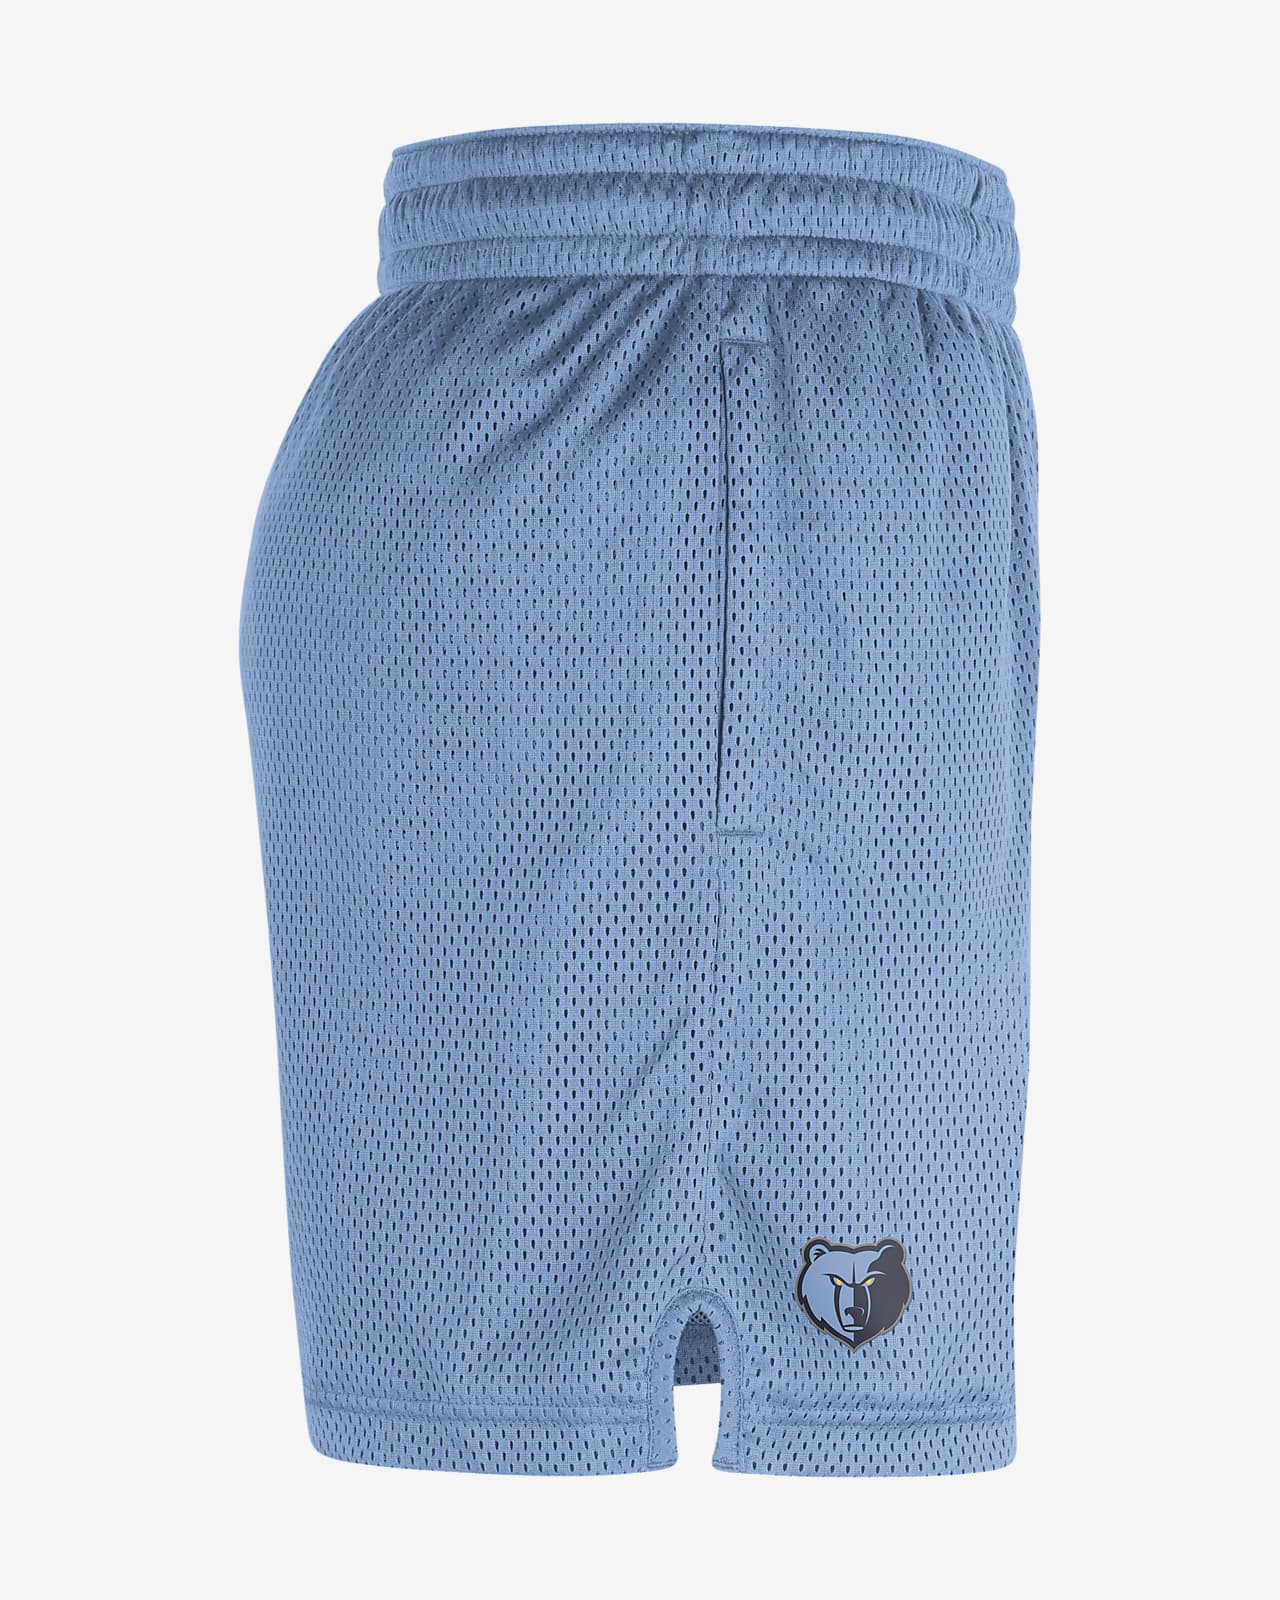 Pro Standard Memphis Grizzlies NBA Shorts – Unleashed Streetwear and Apparel